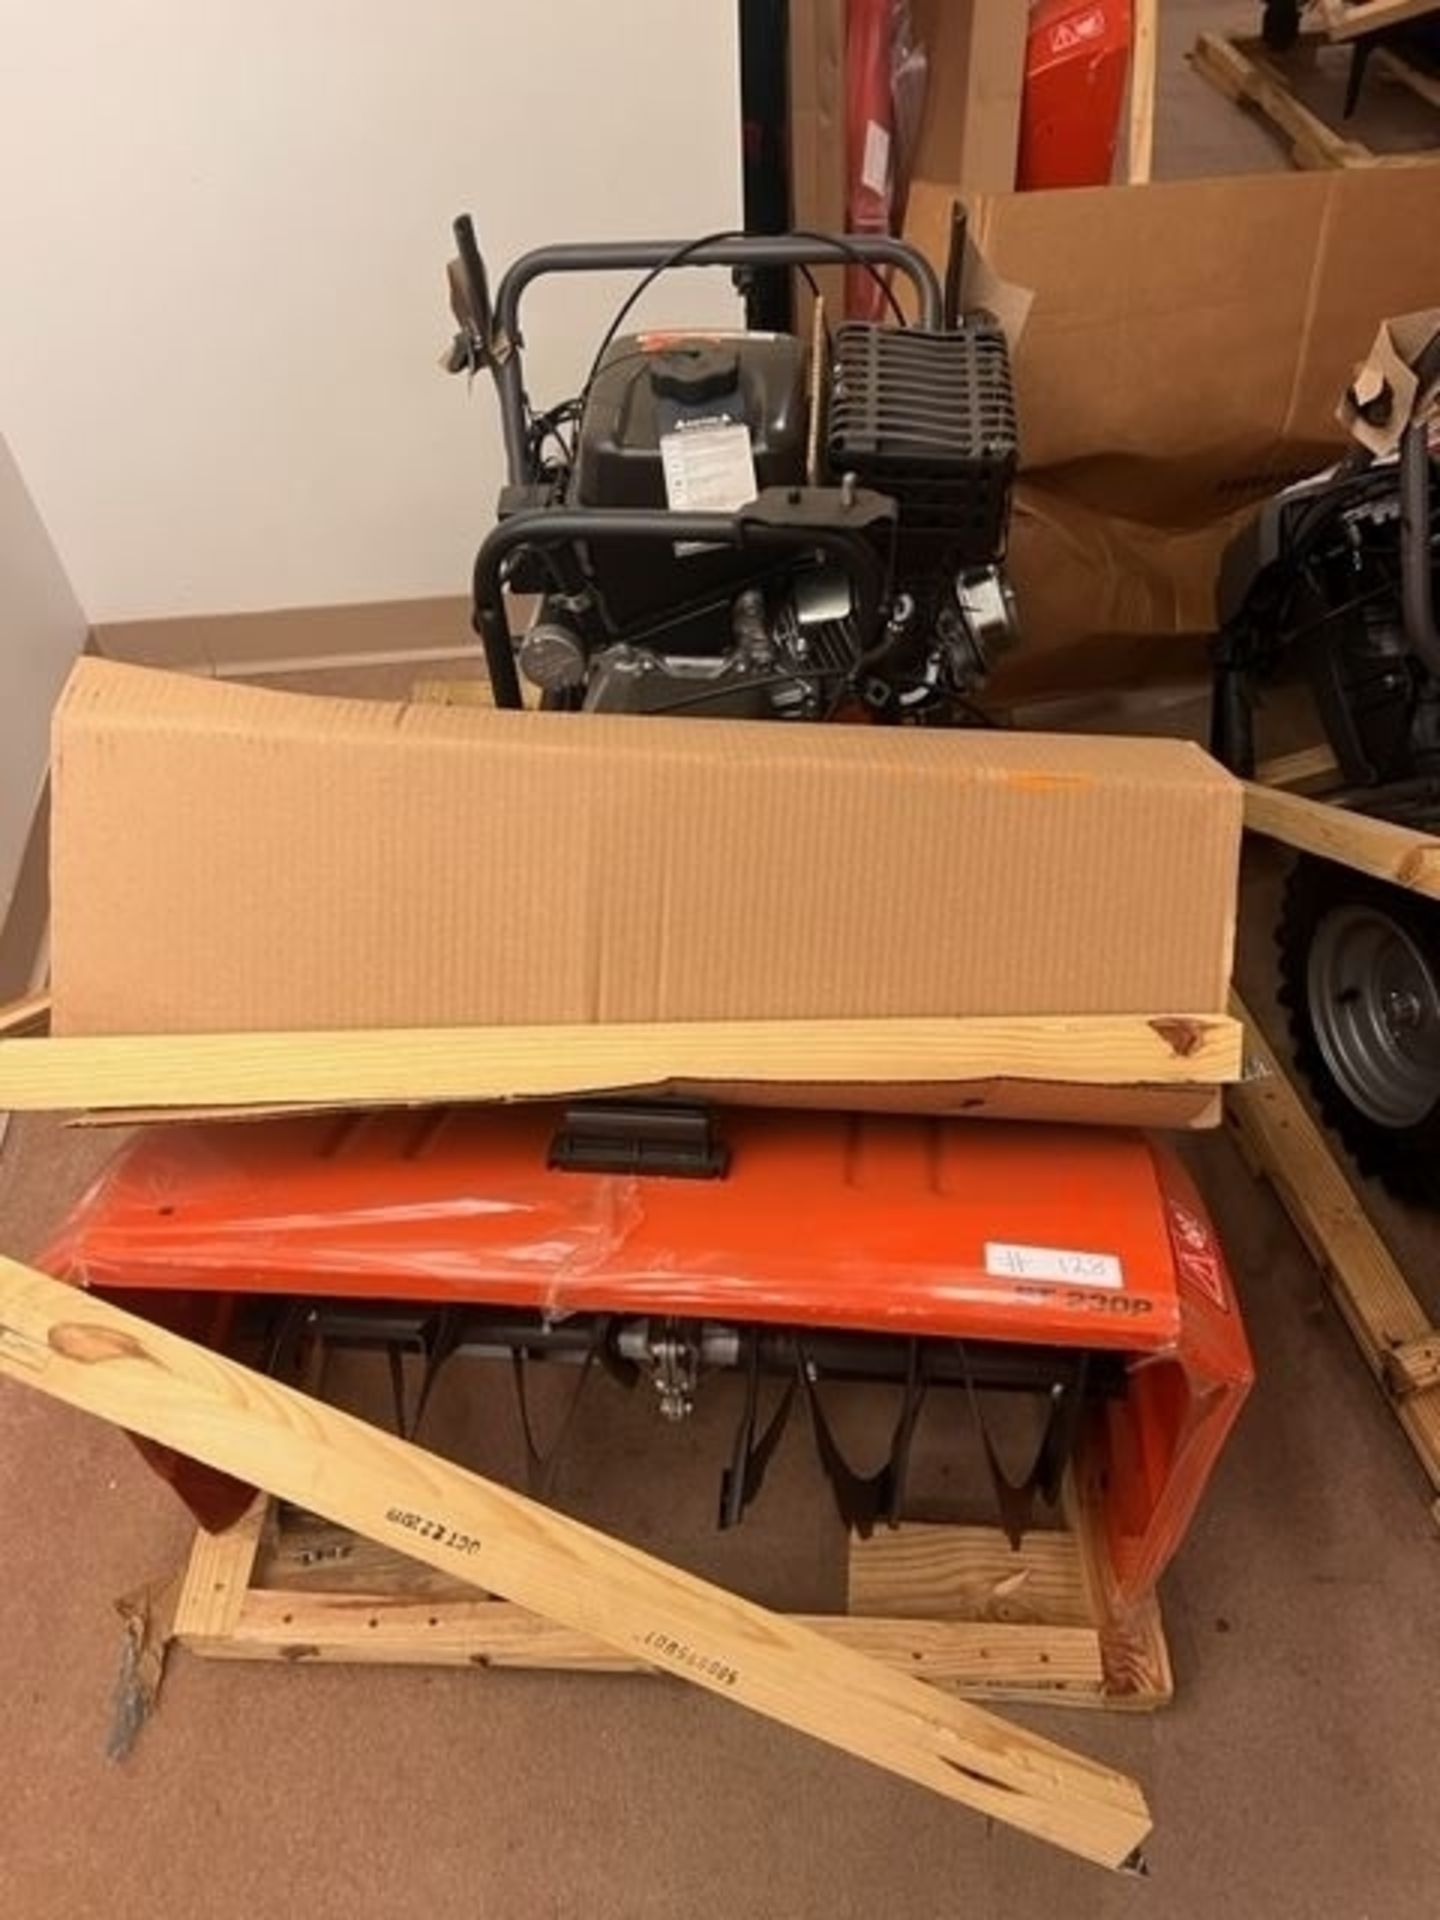 Husqvarna ST 230P Self Propelled Snow Blower - Approx. MSRP $1299 - Image 4 of 5